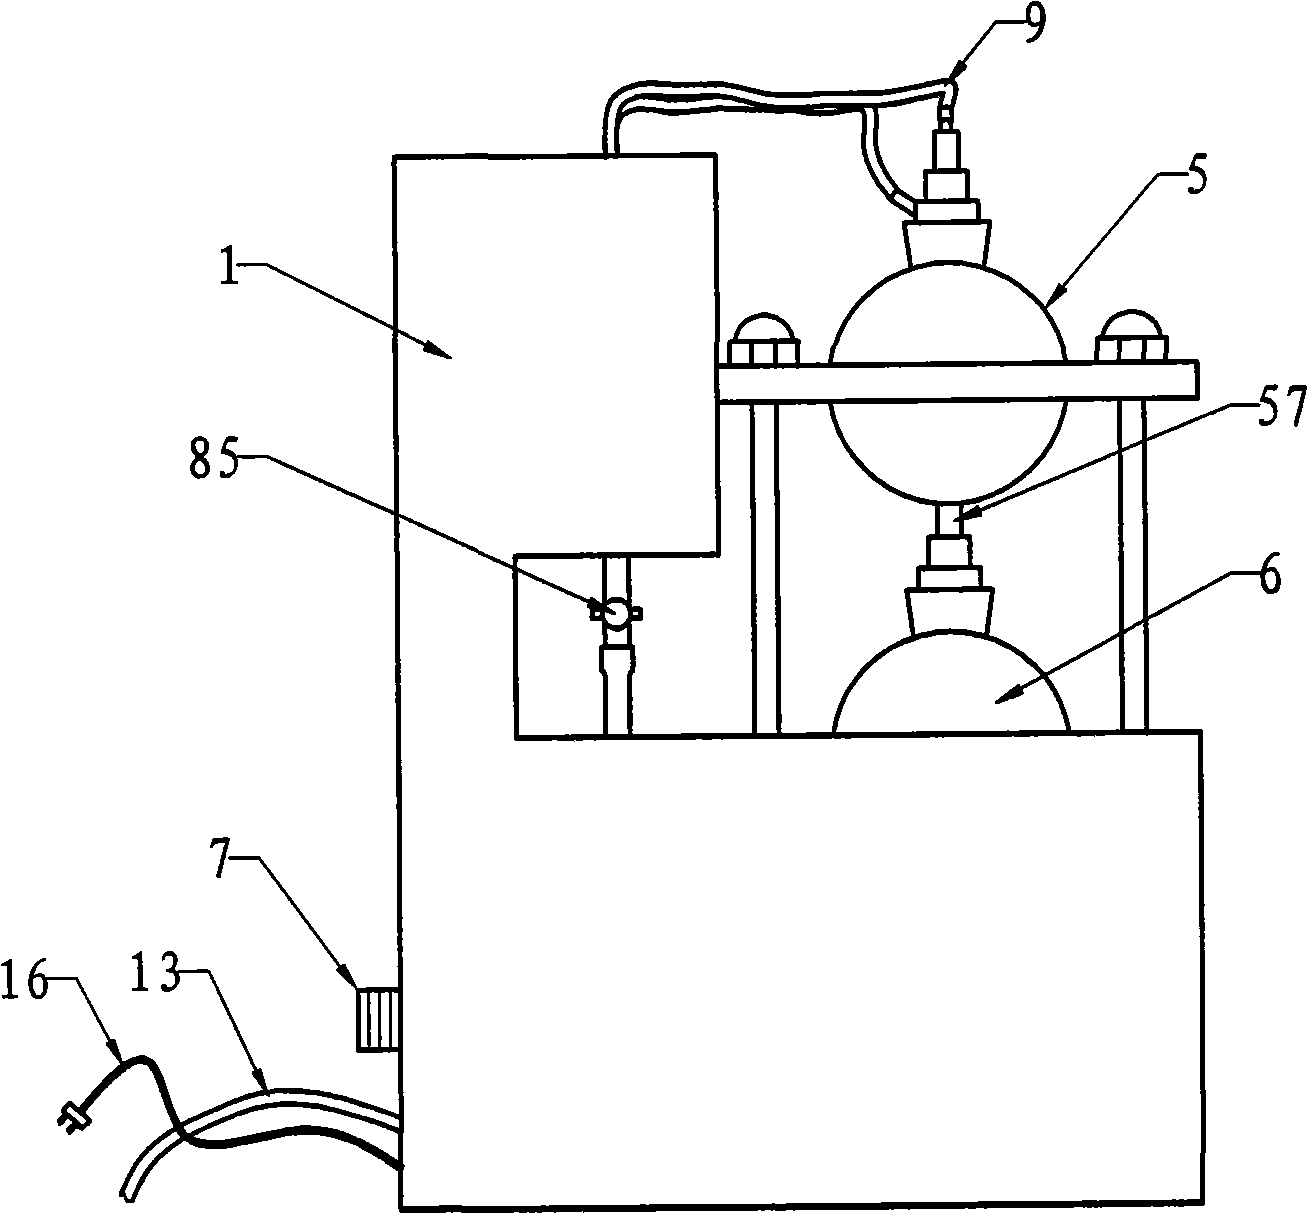 Full automatic extraction device